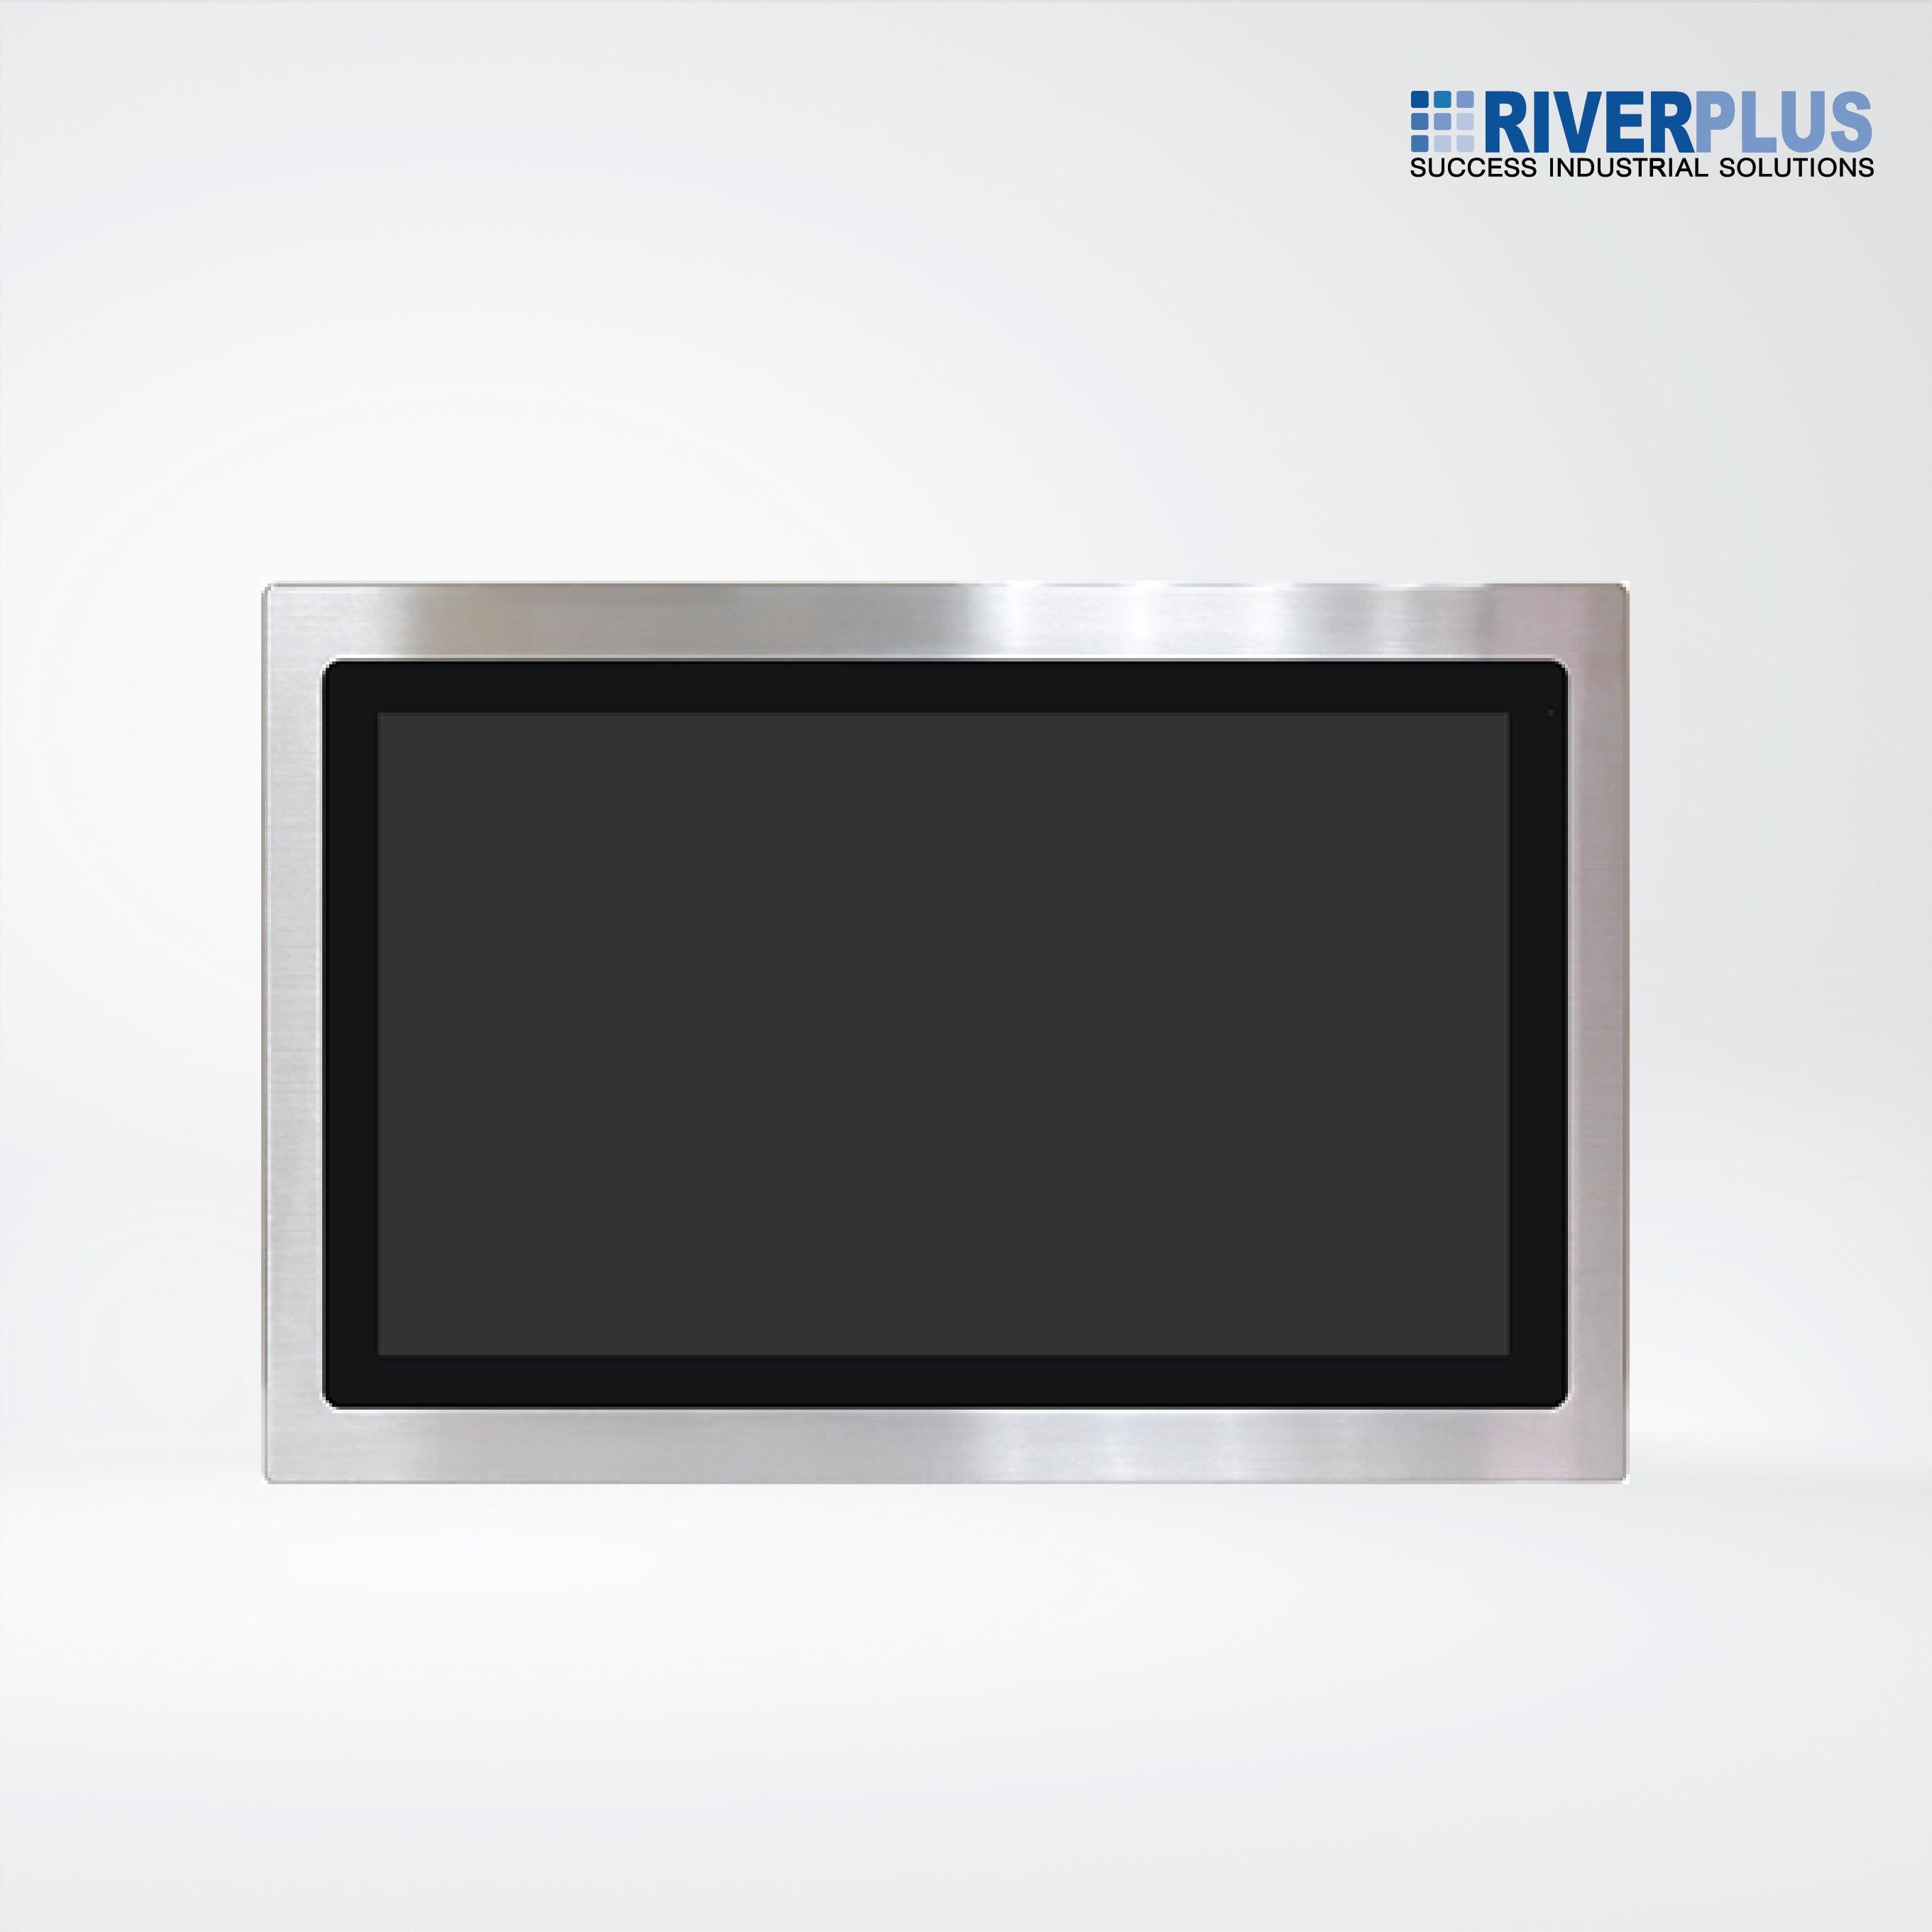 FABS-121PH 21.5” Flat Front Panel IP66 Stainless Chassis Display - Riverplus